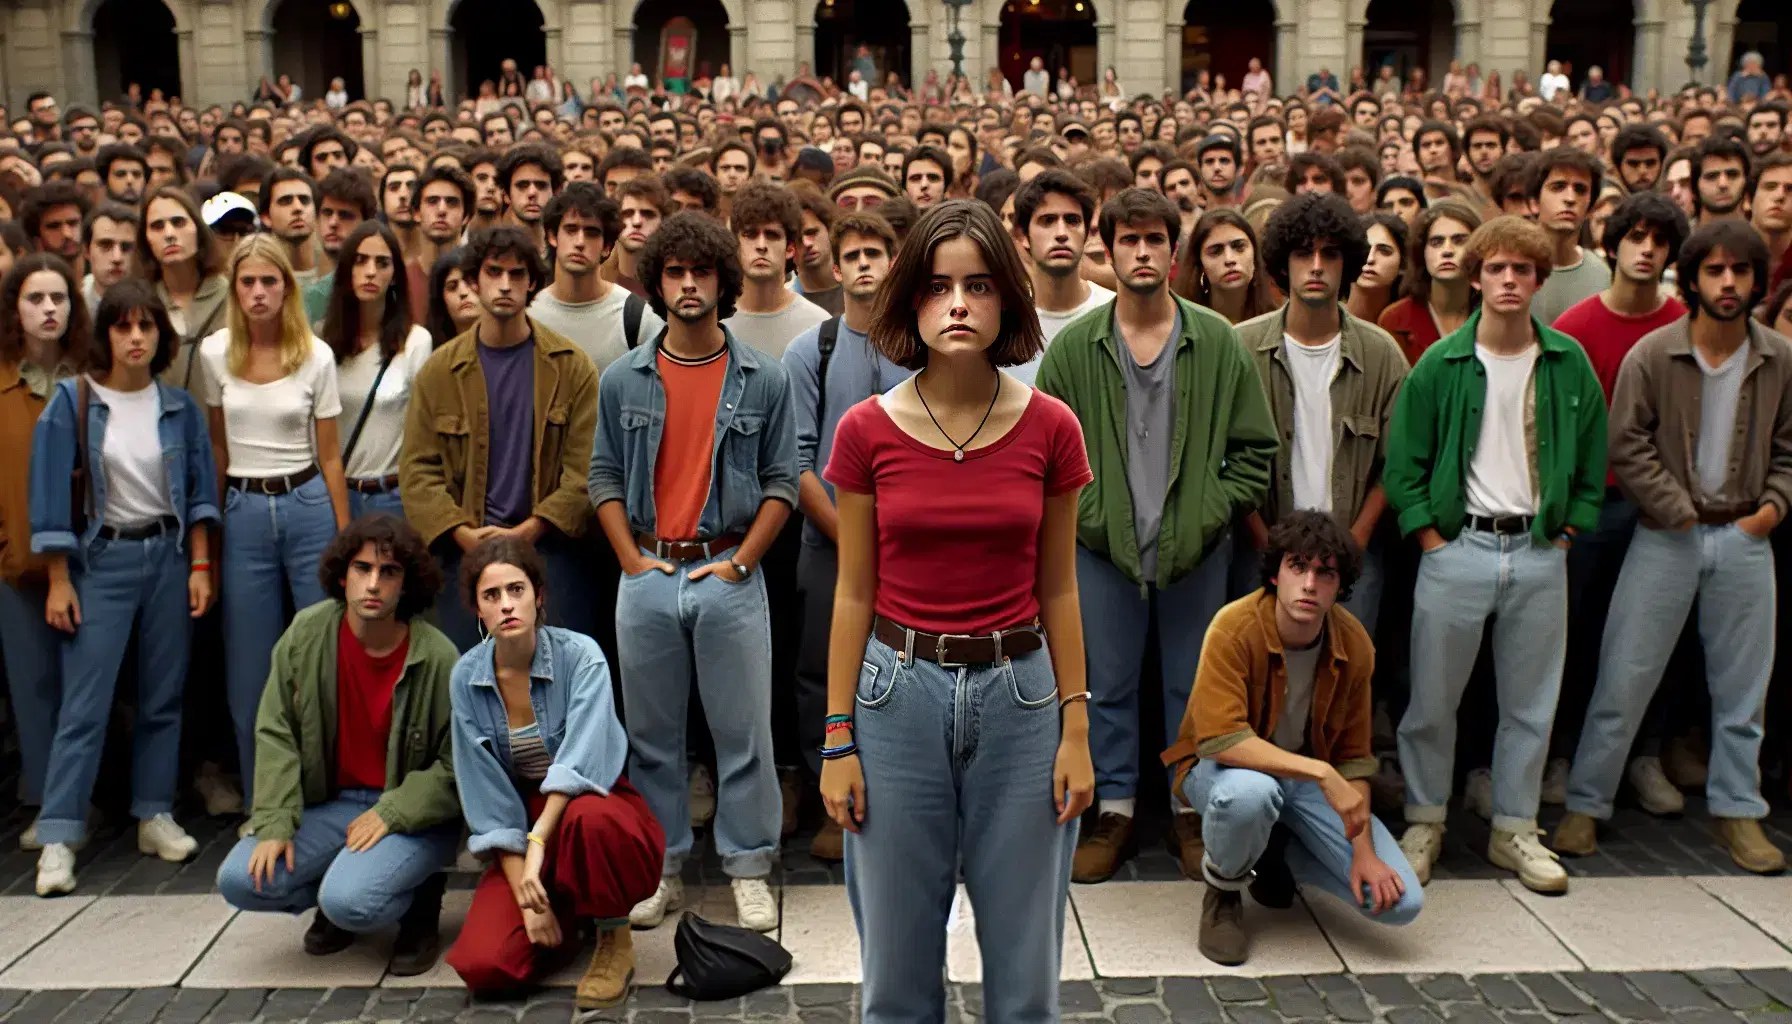 Diverse group of young people engaged in a gathering at a Spanish city square, with a woman in red listening intently in the foreground.